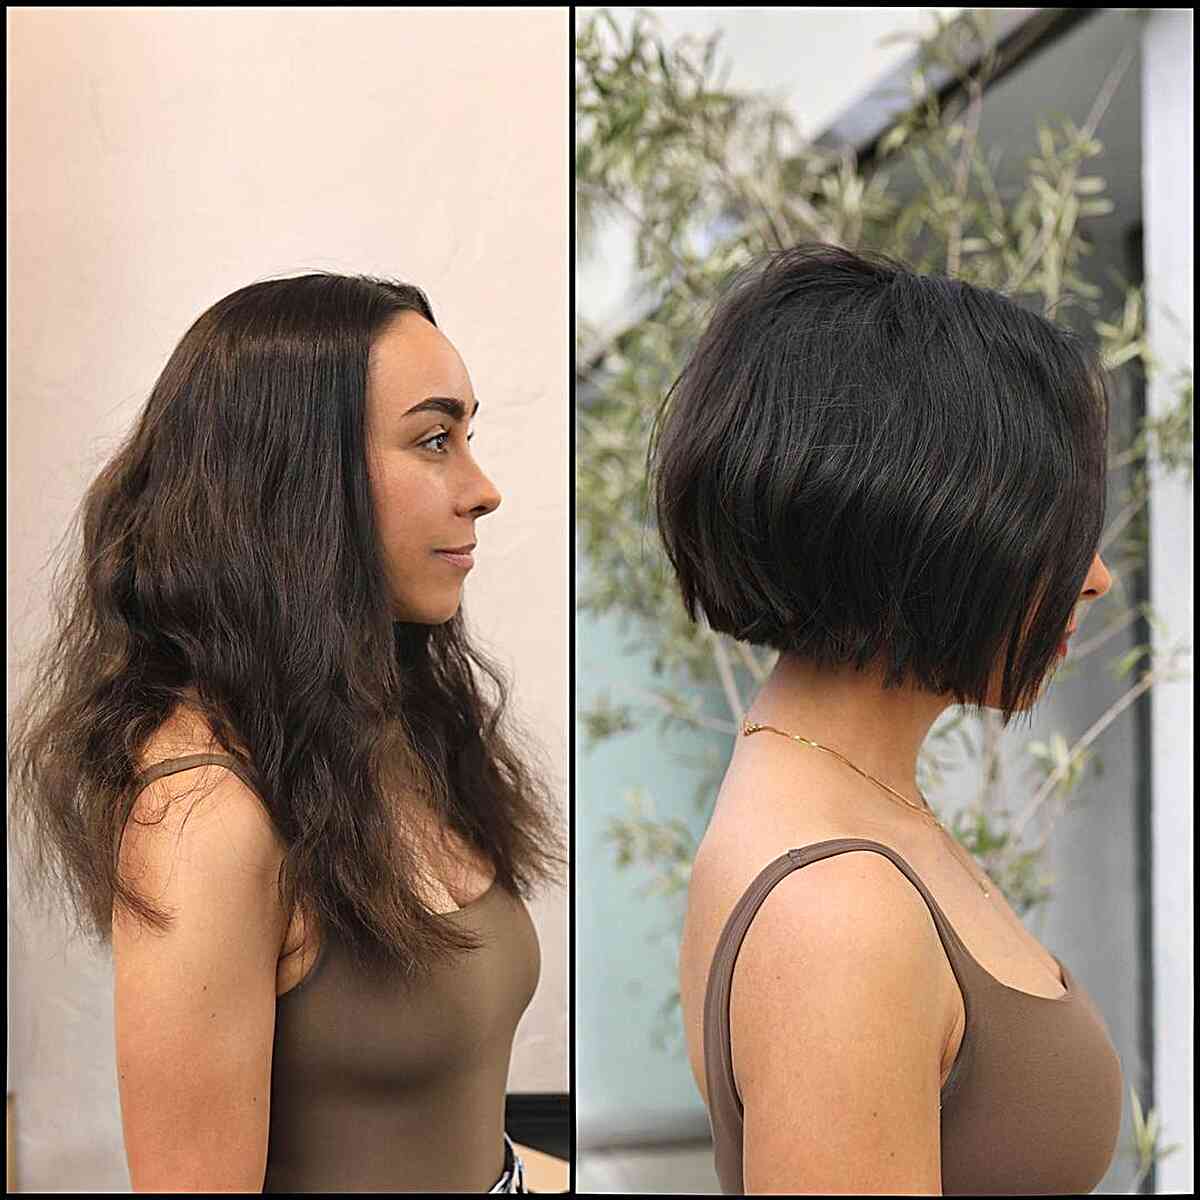 Amazing Chin-Length Chopped Blunt Bob Makeover for ladies looking for a change